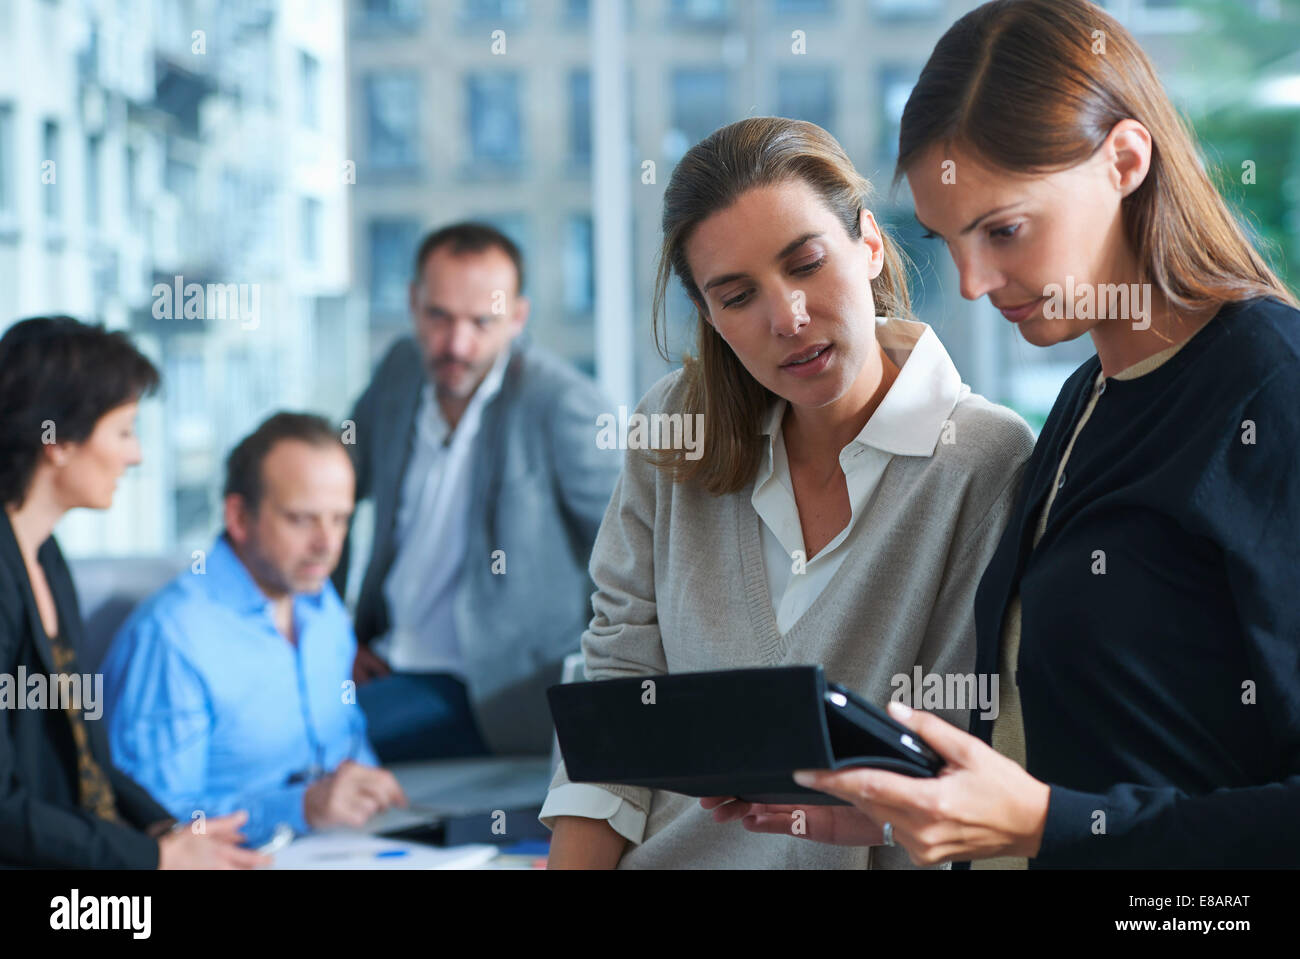 Five businesswomen and men busy working in office Stock Photo